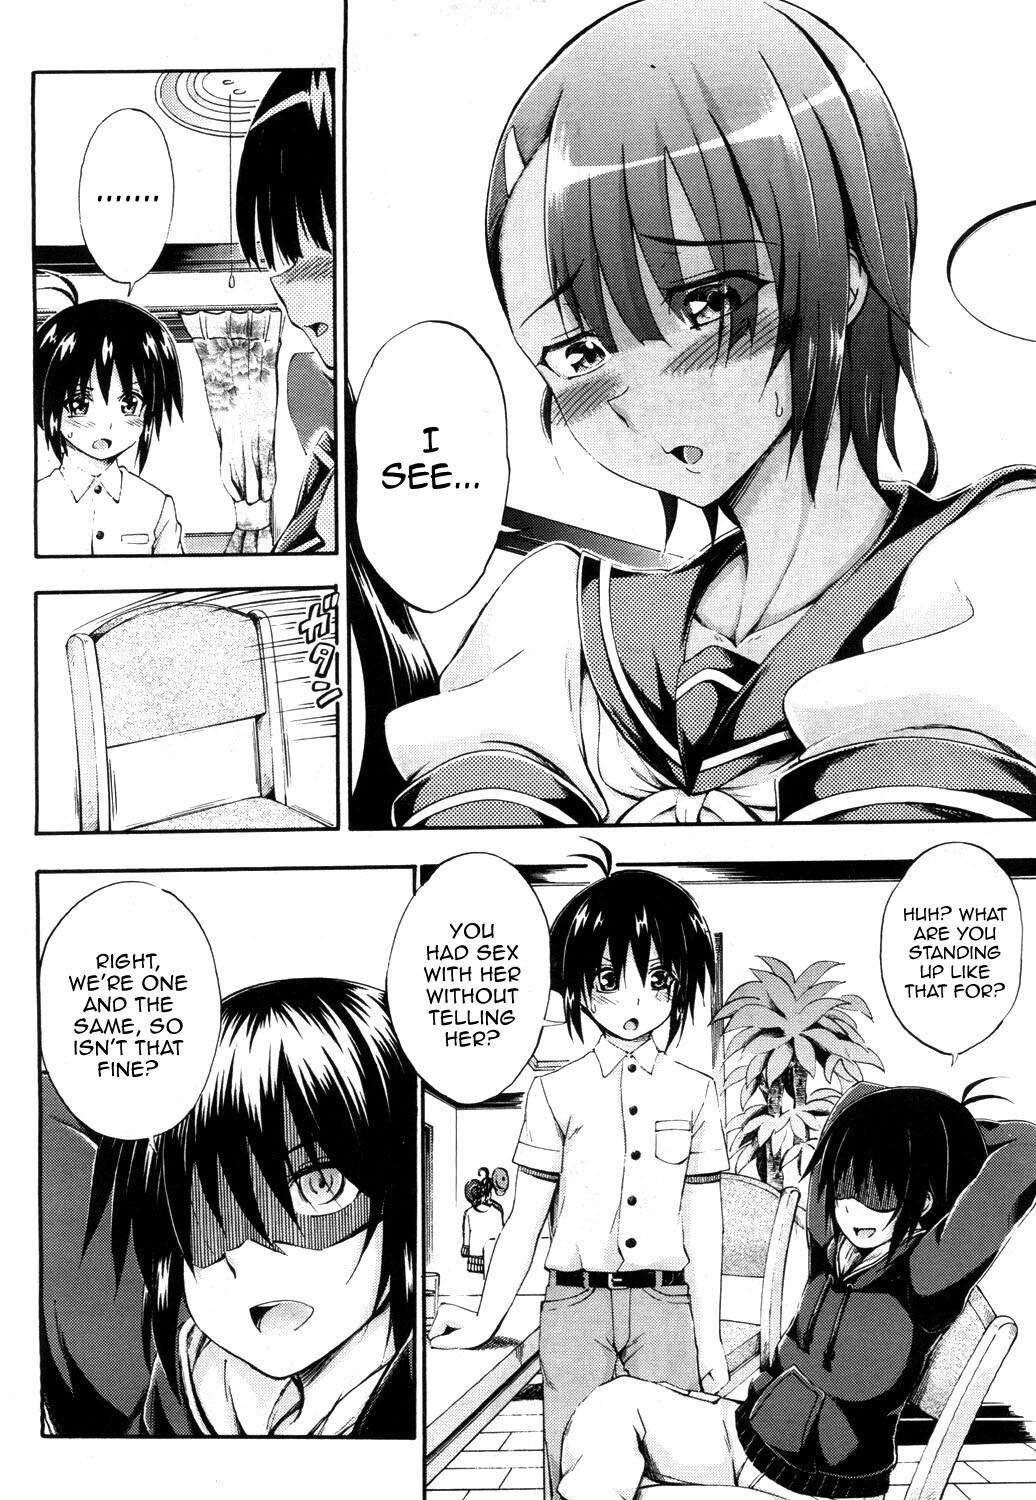 Doppel wa Onee-chan to H Shitai! Ch. 2 | My Doppelganger Wants To Have Sex With My Older Sister Ch. 2 5